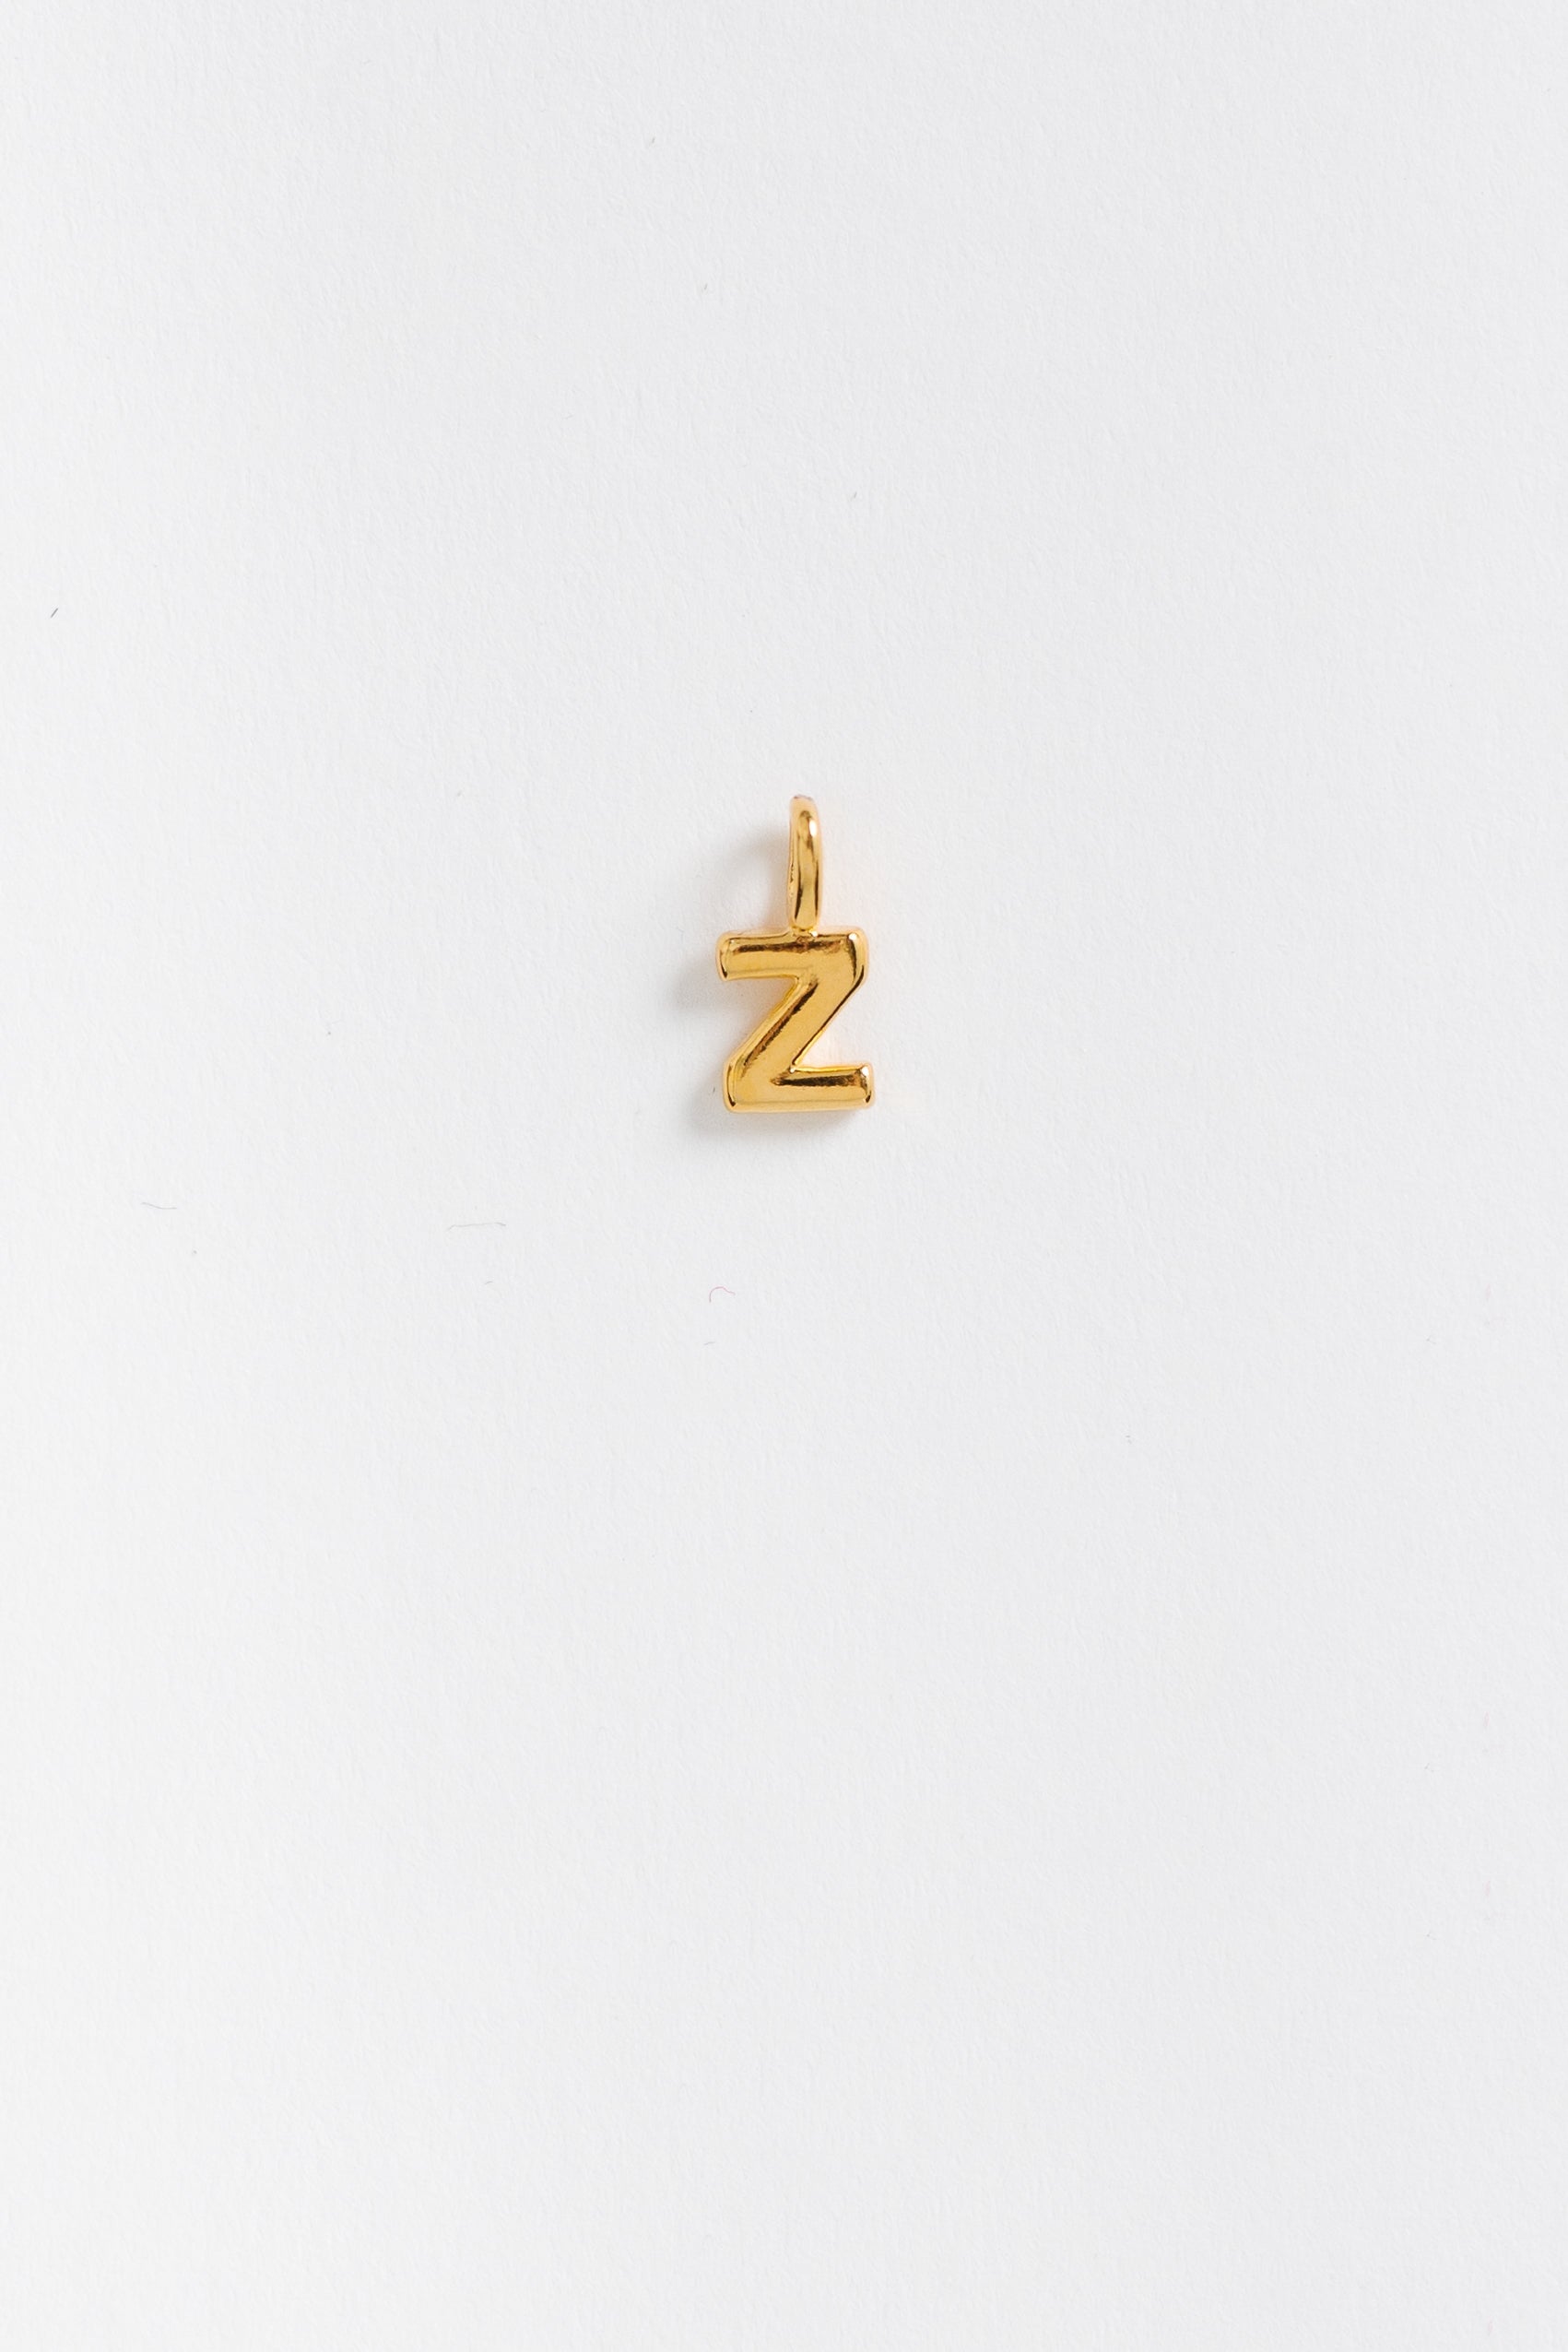 Cove Charm Initial Cove Charms Cove Accessories Z OS 